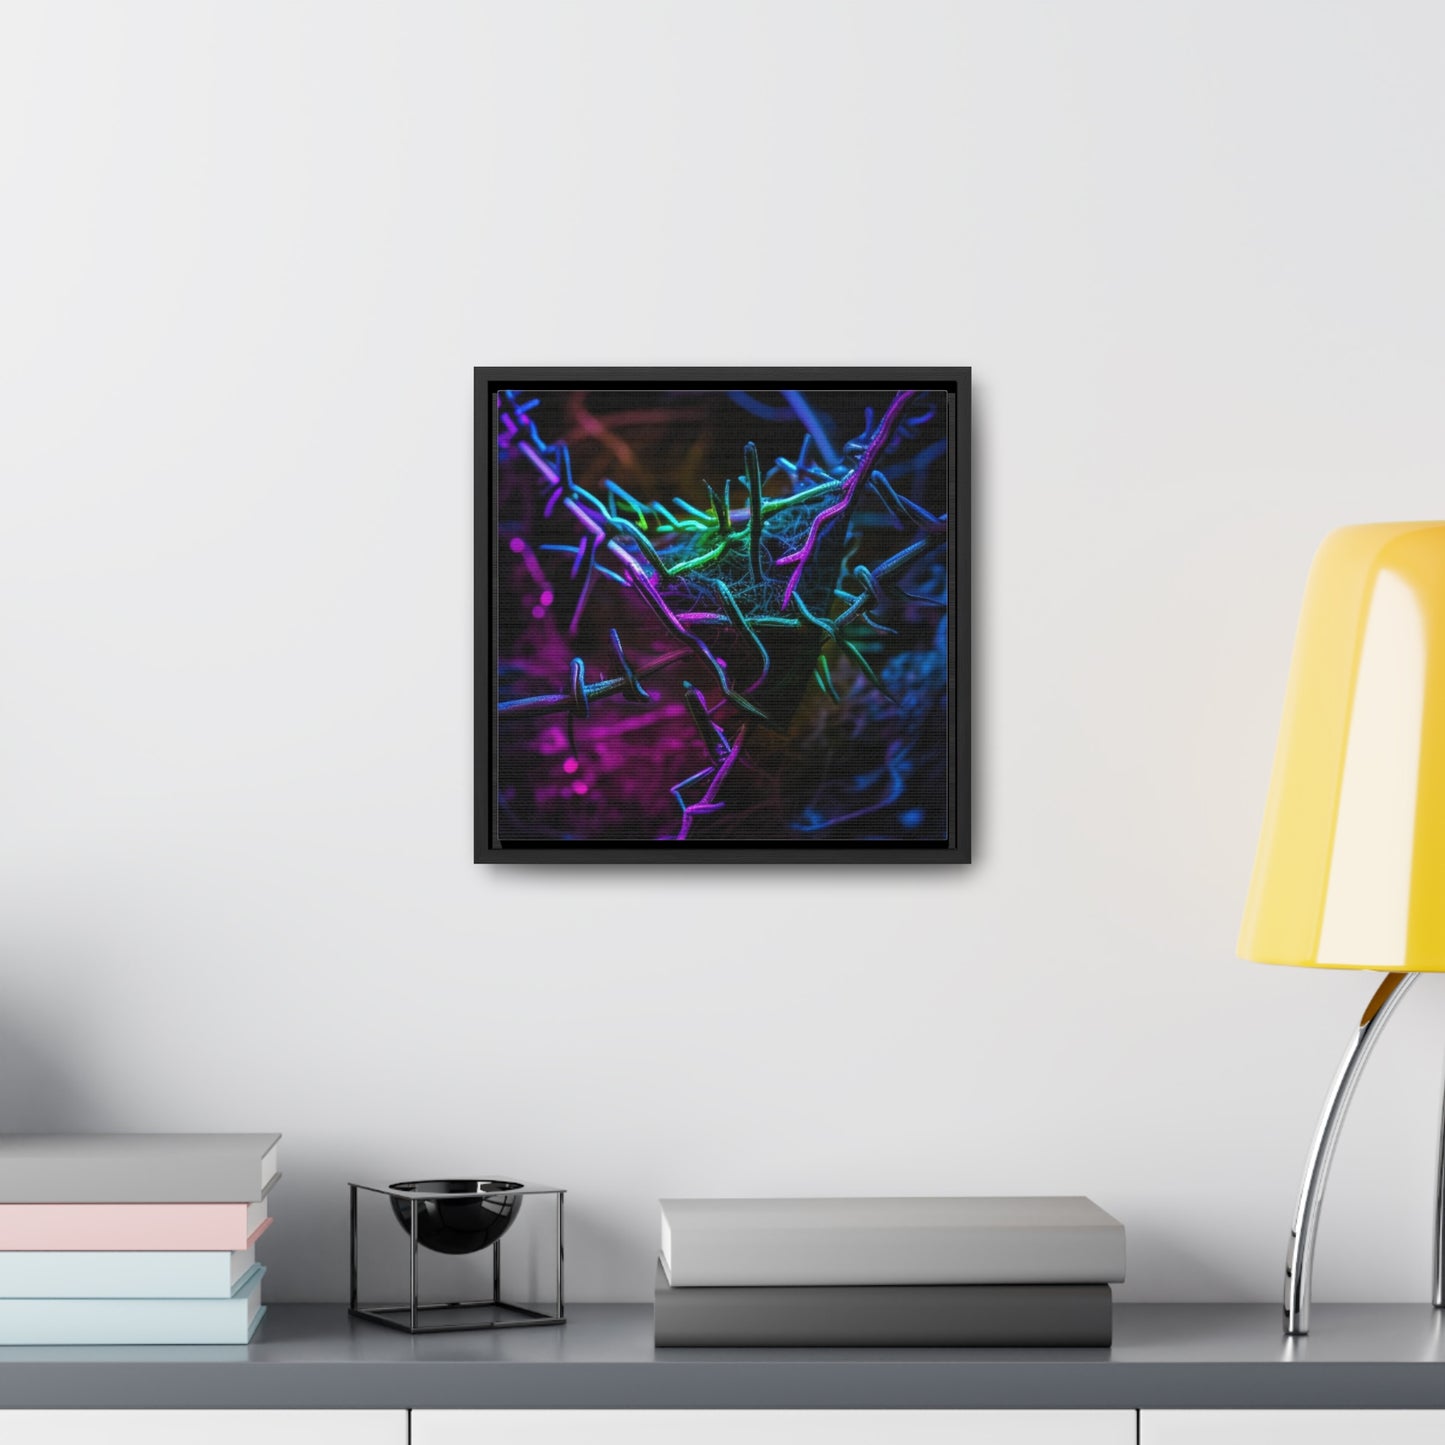 Gallery Canvas Wraps, Square Frame Macro Neon Barb 3